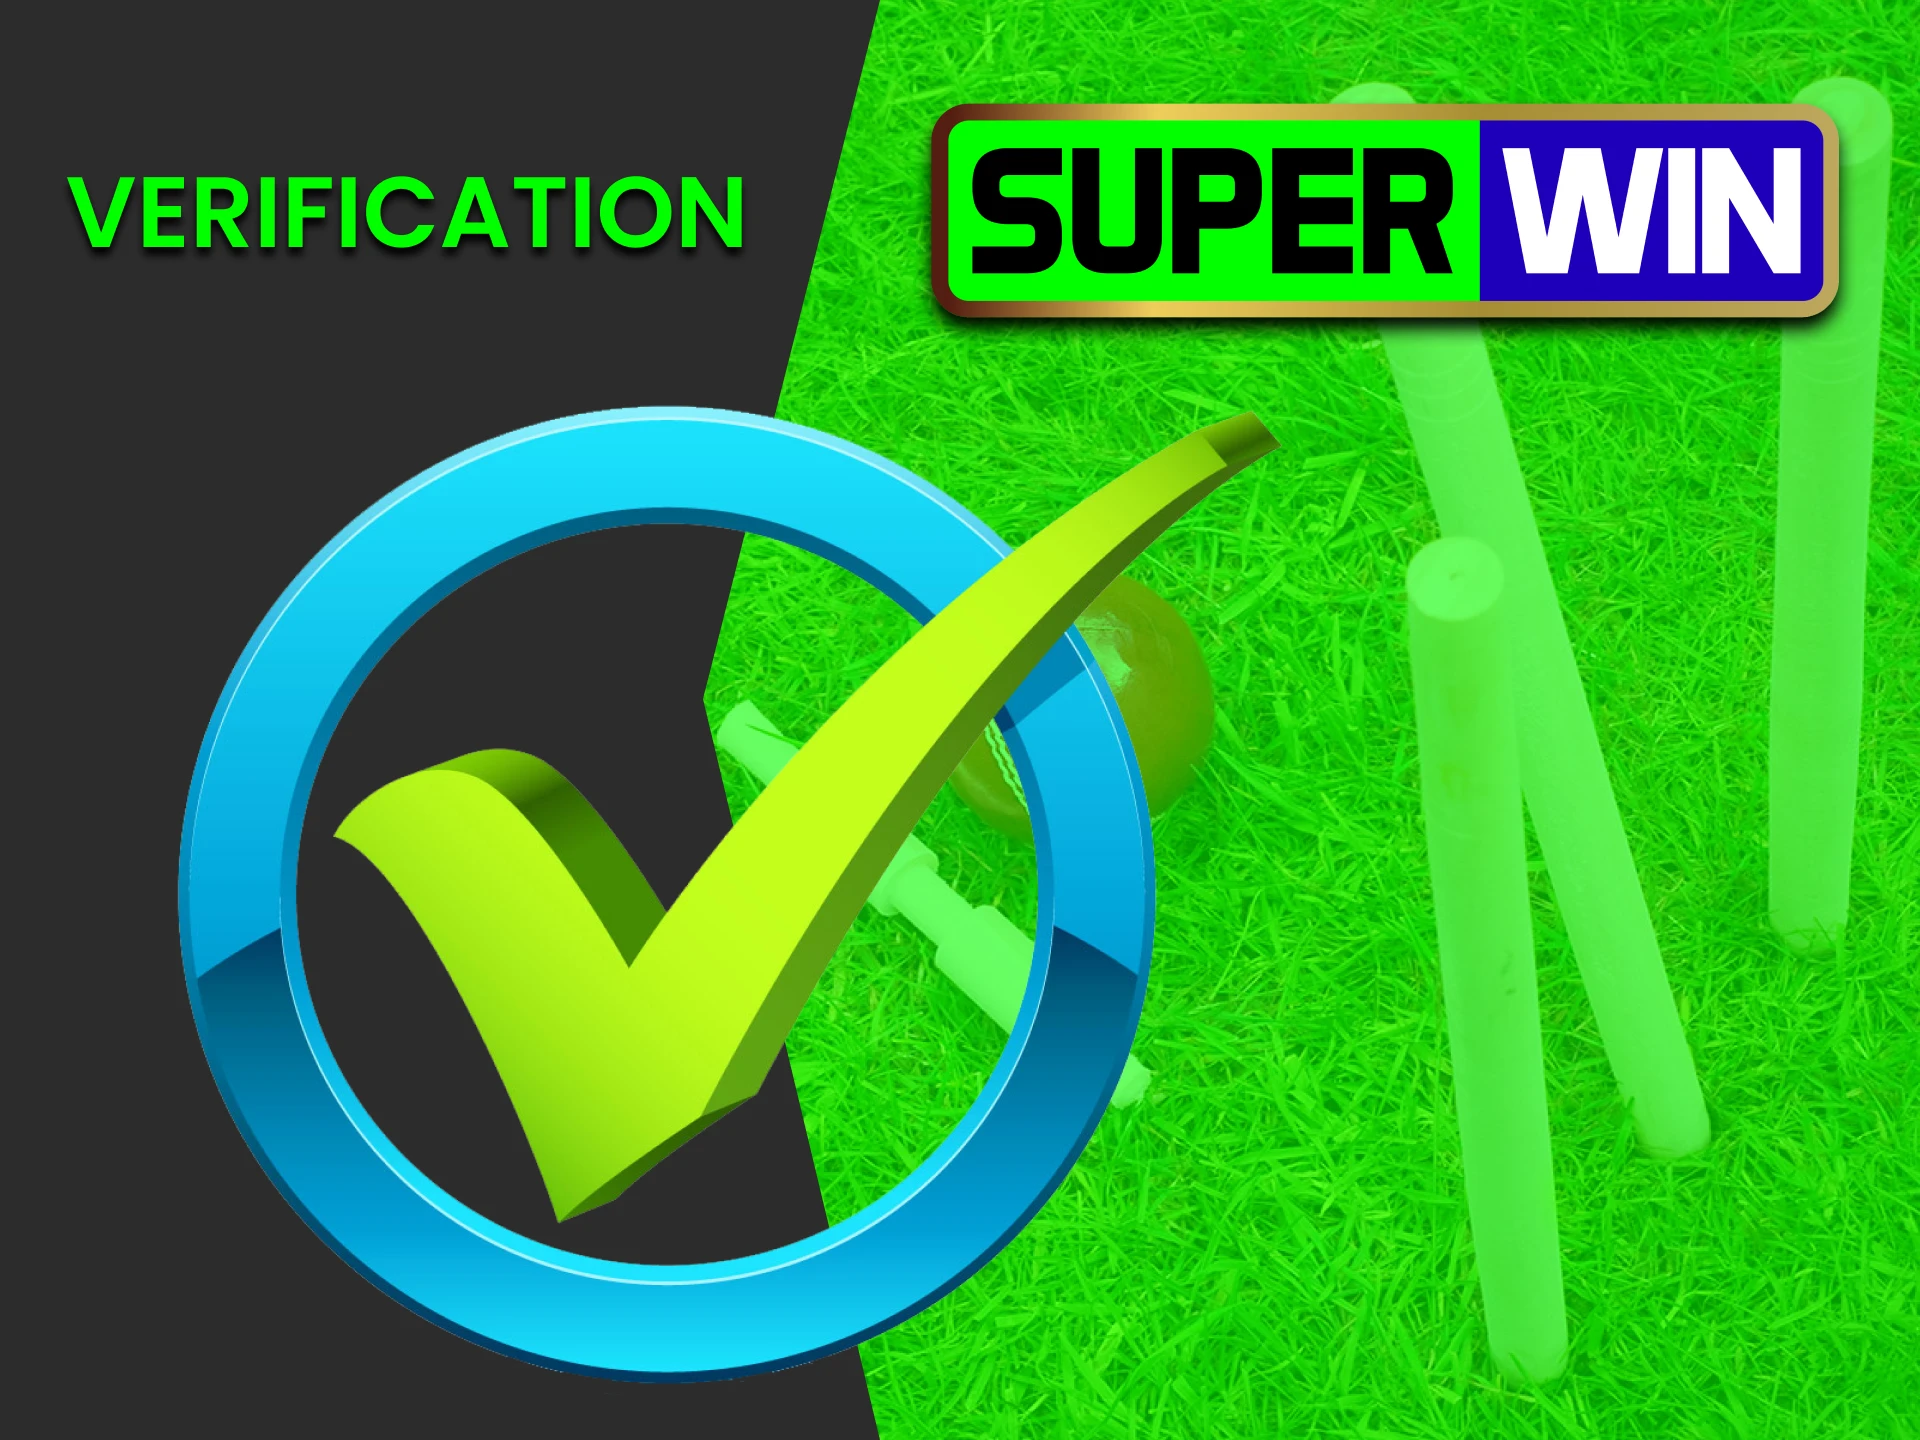 Fill in your personal information for the Superwin service.